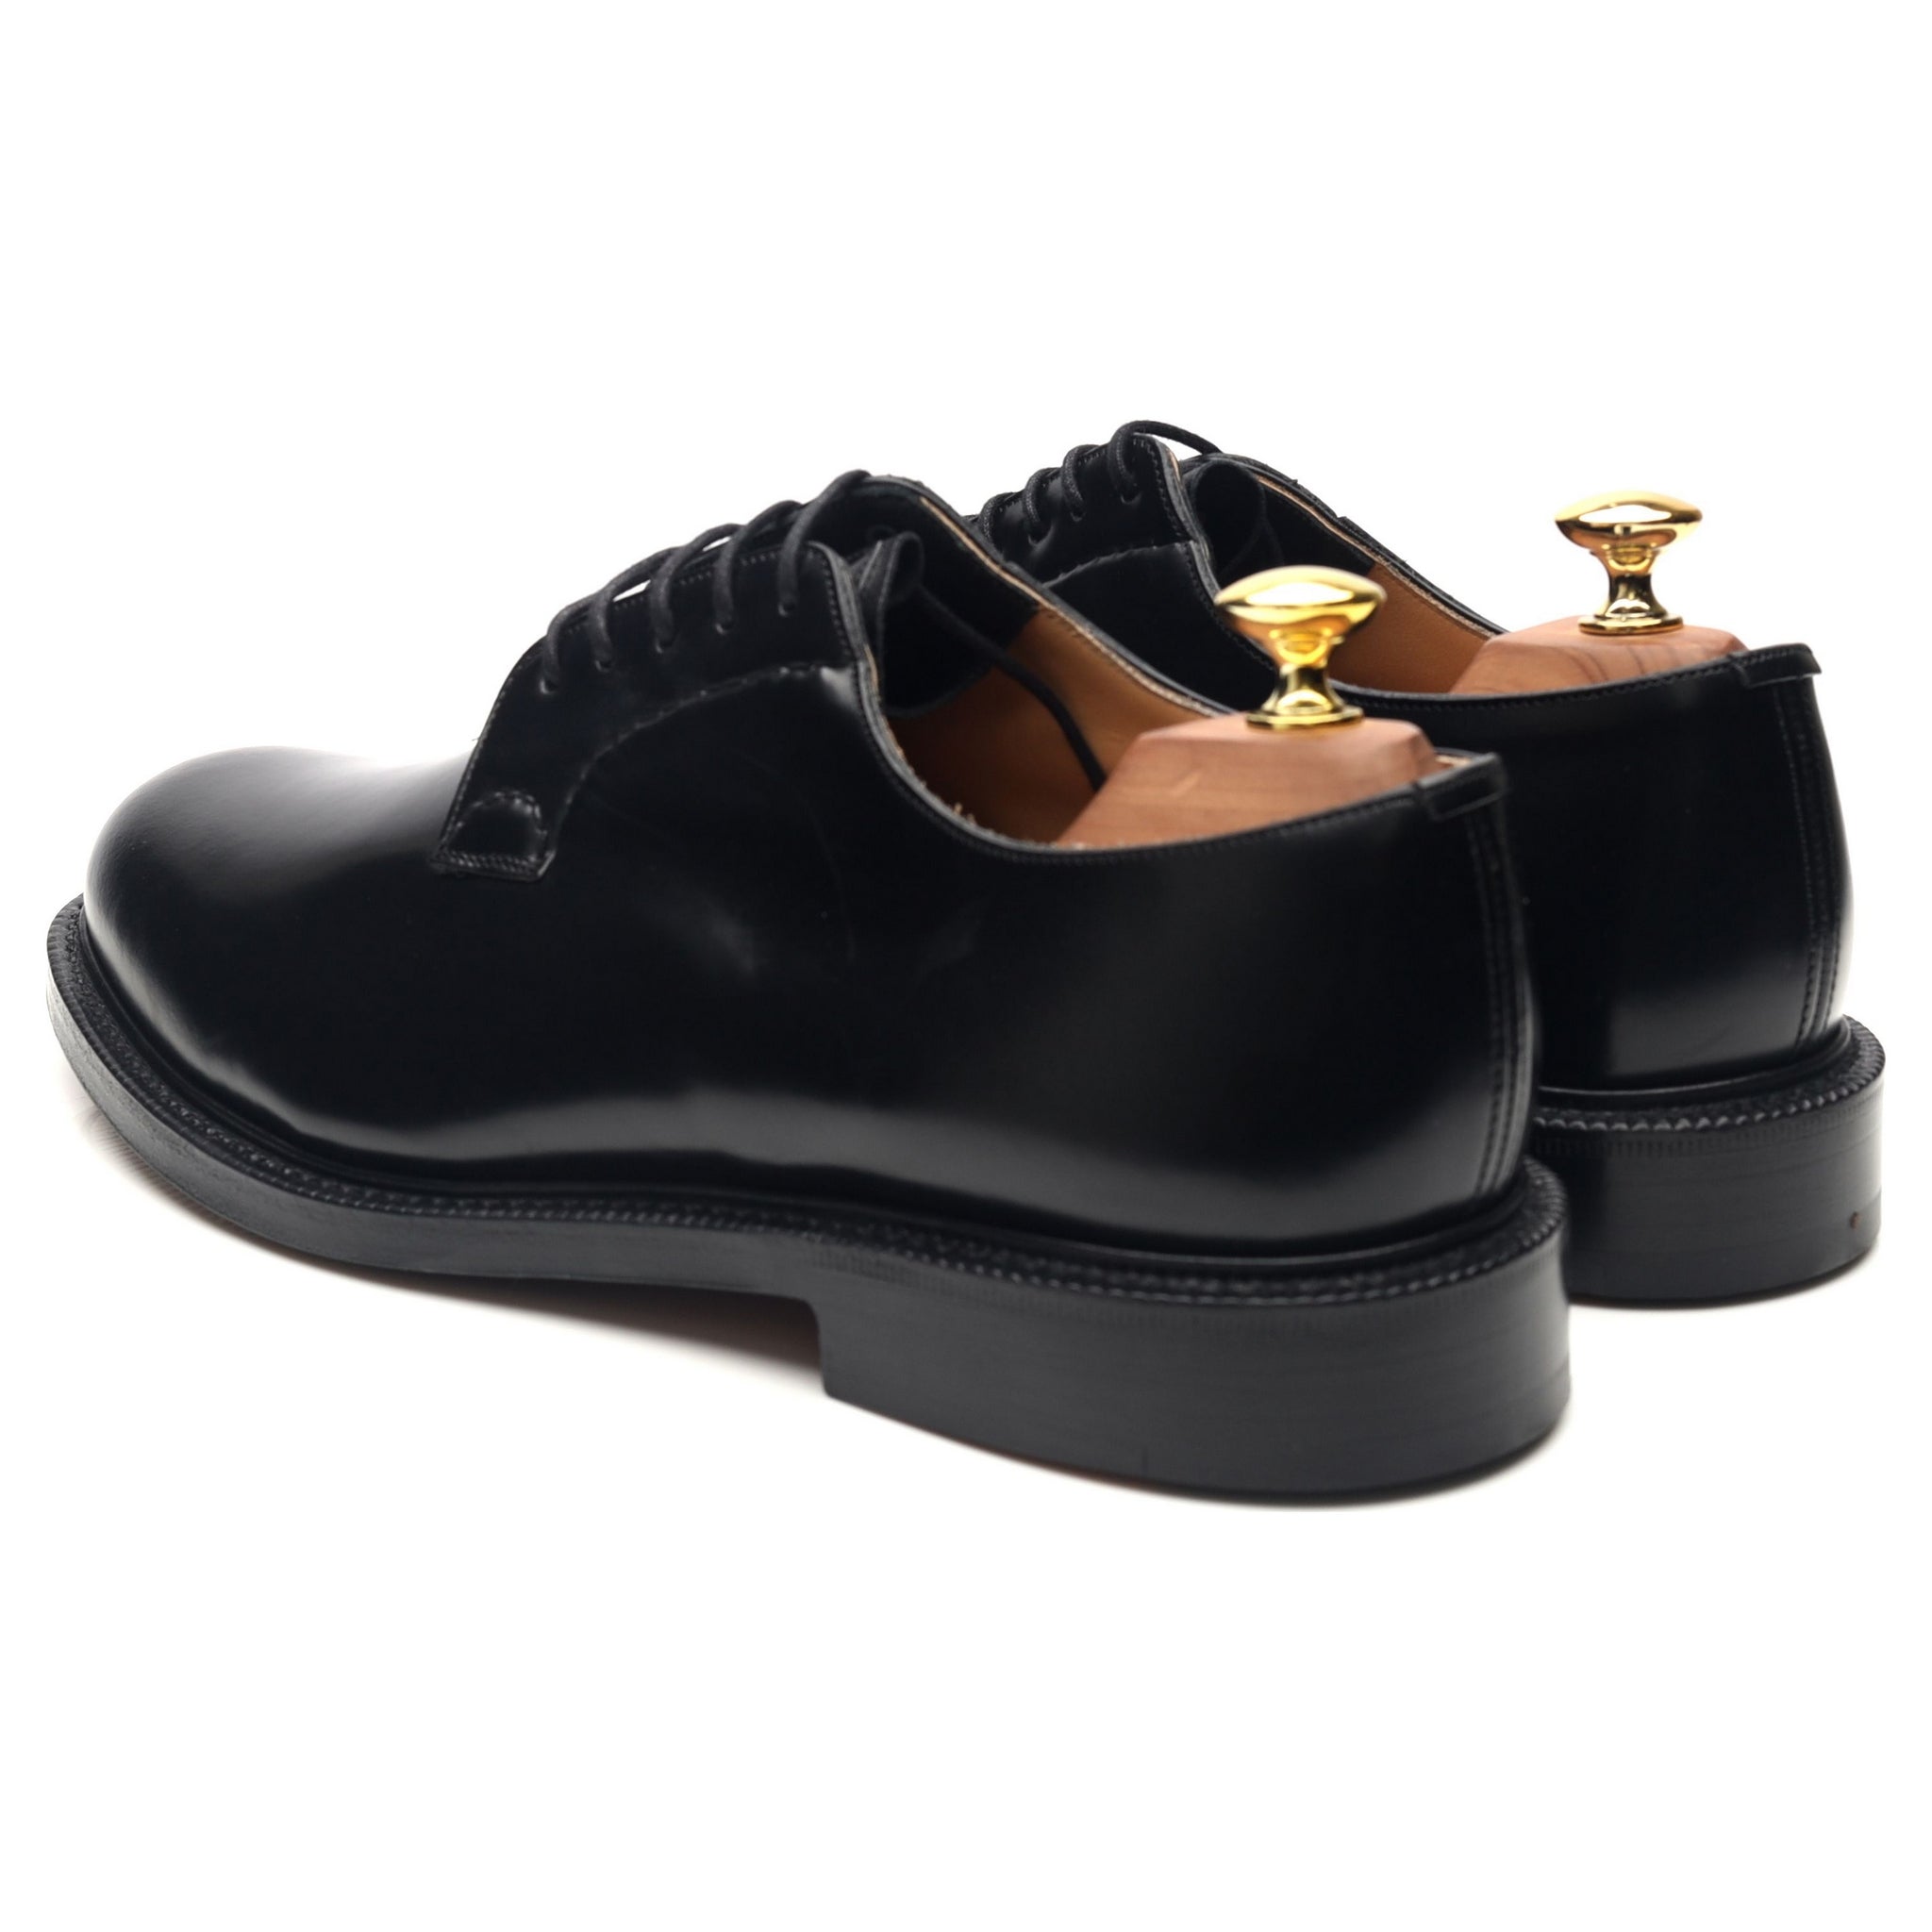 Shannon' Black Leather Derby UK 8.5 G - Abbot's Shoes